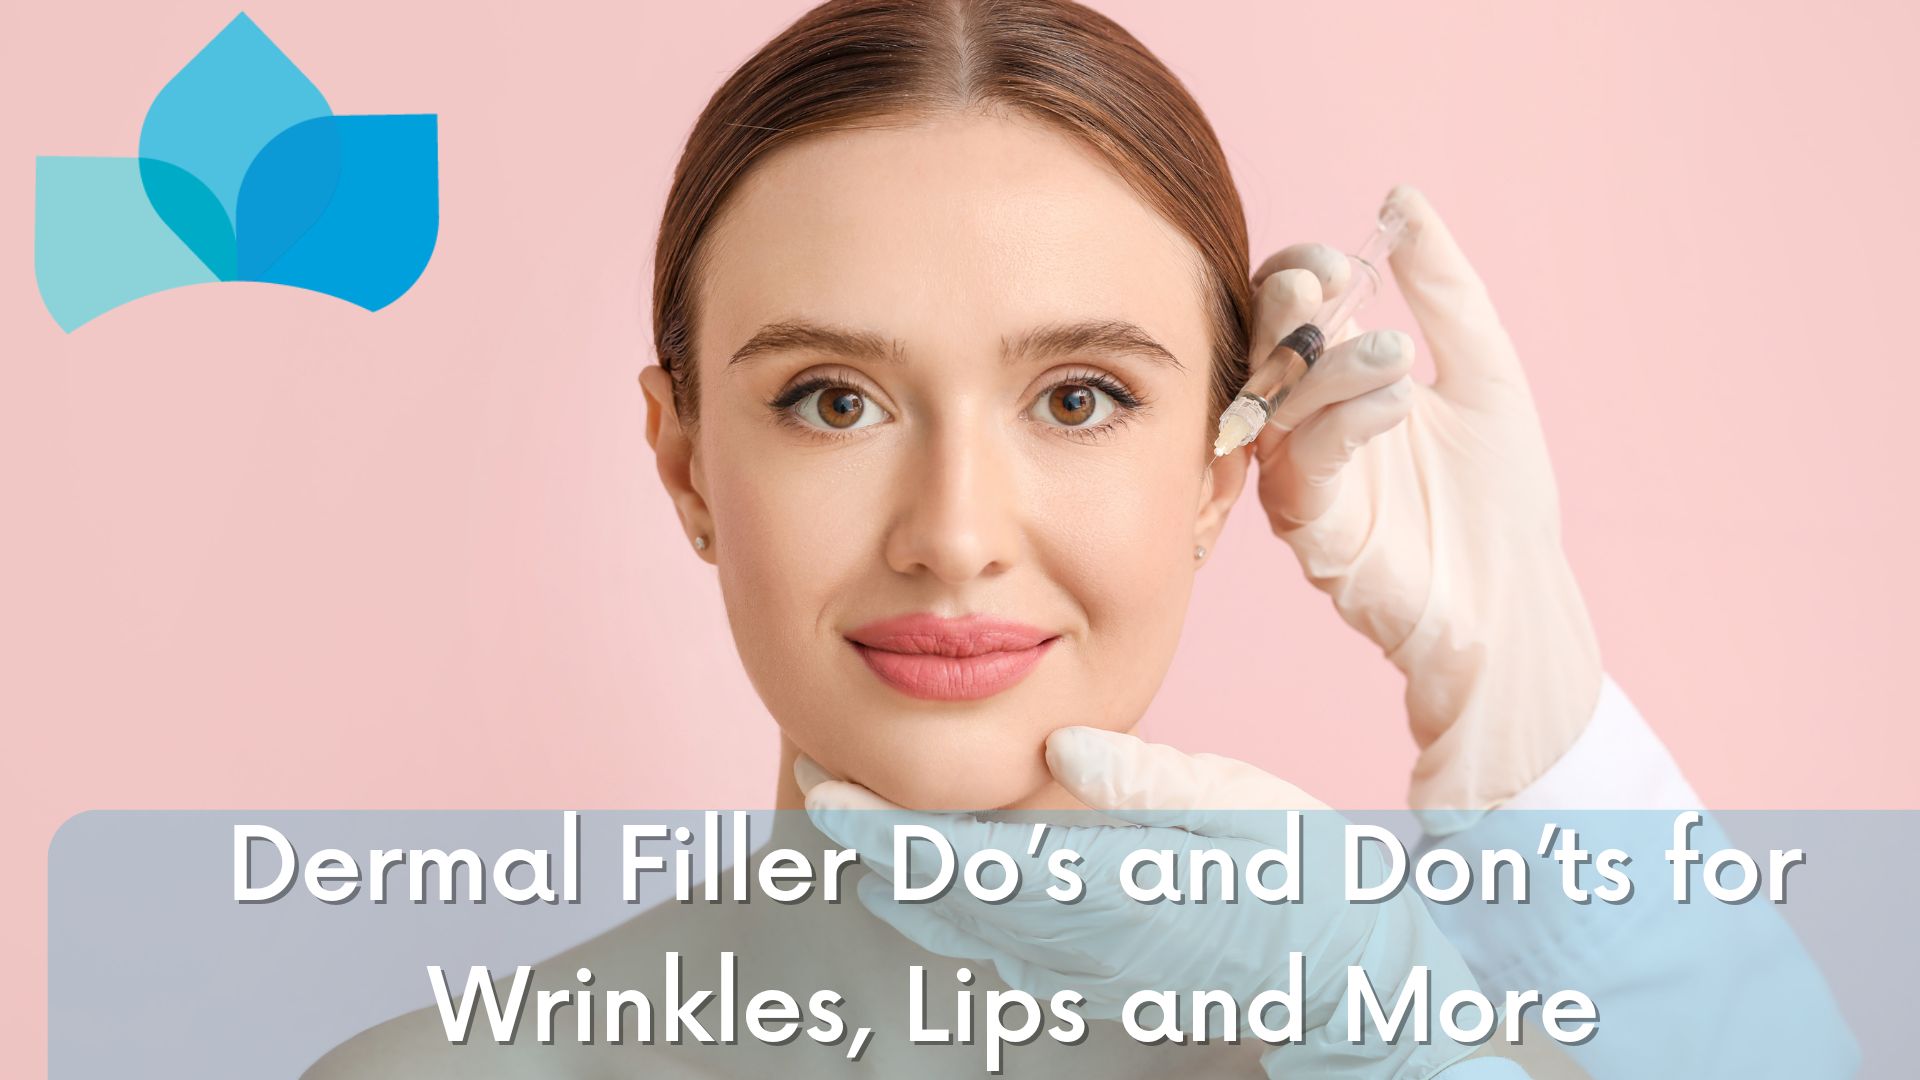 dermal fillers do's and don'ts advice